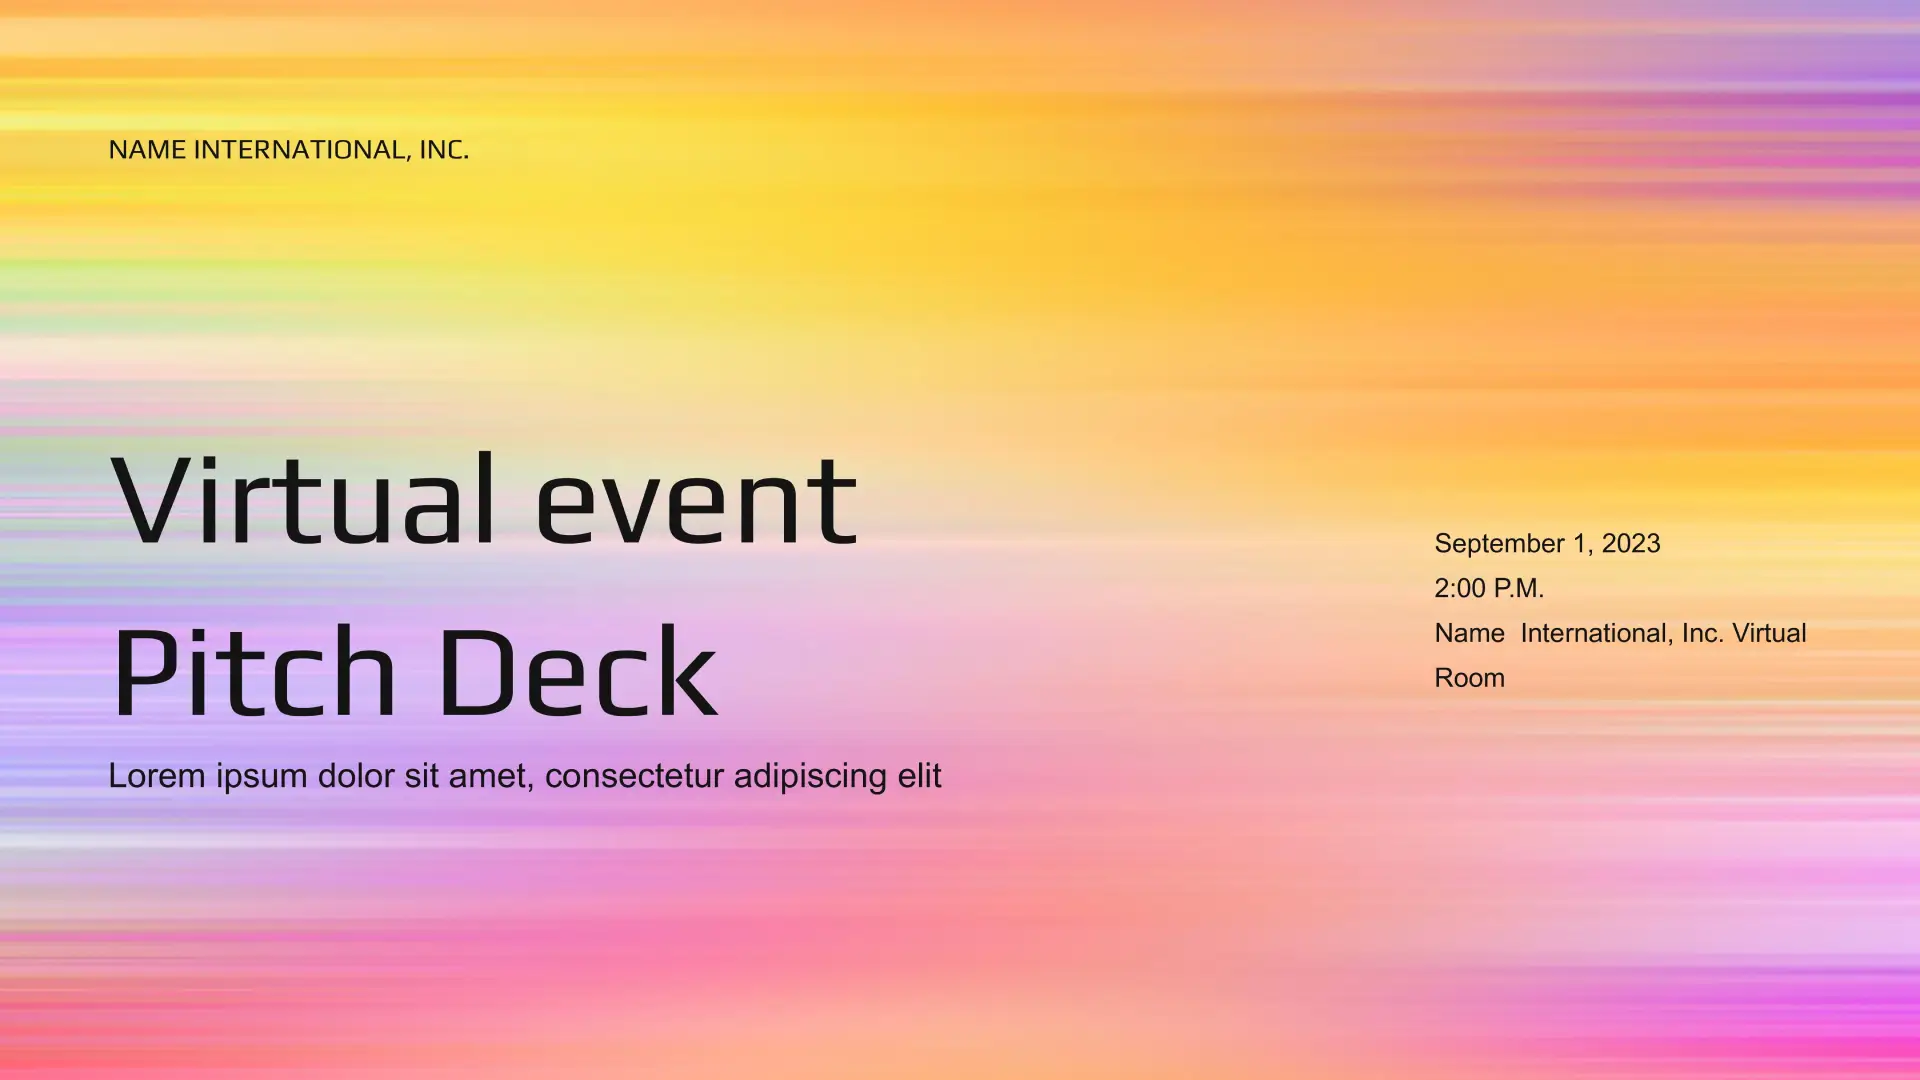 Virtual event Pitch Deck Template for Google Slides